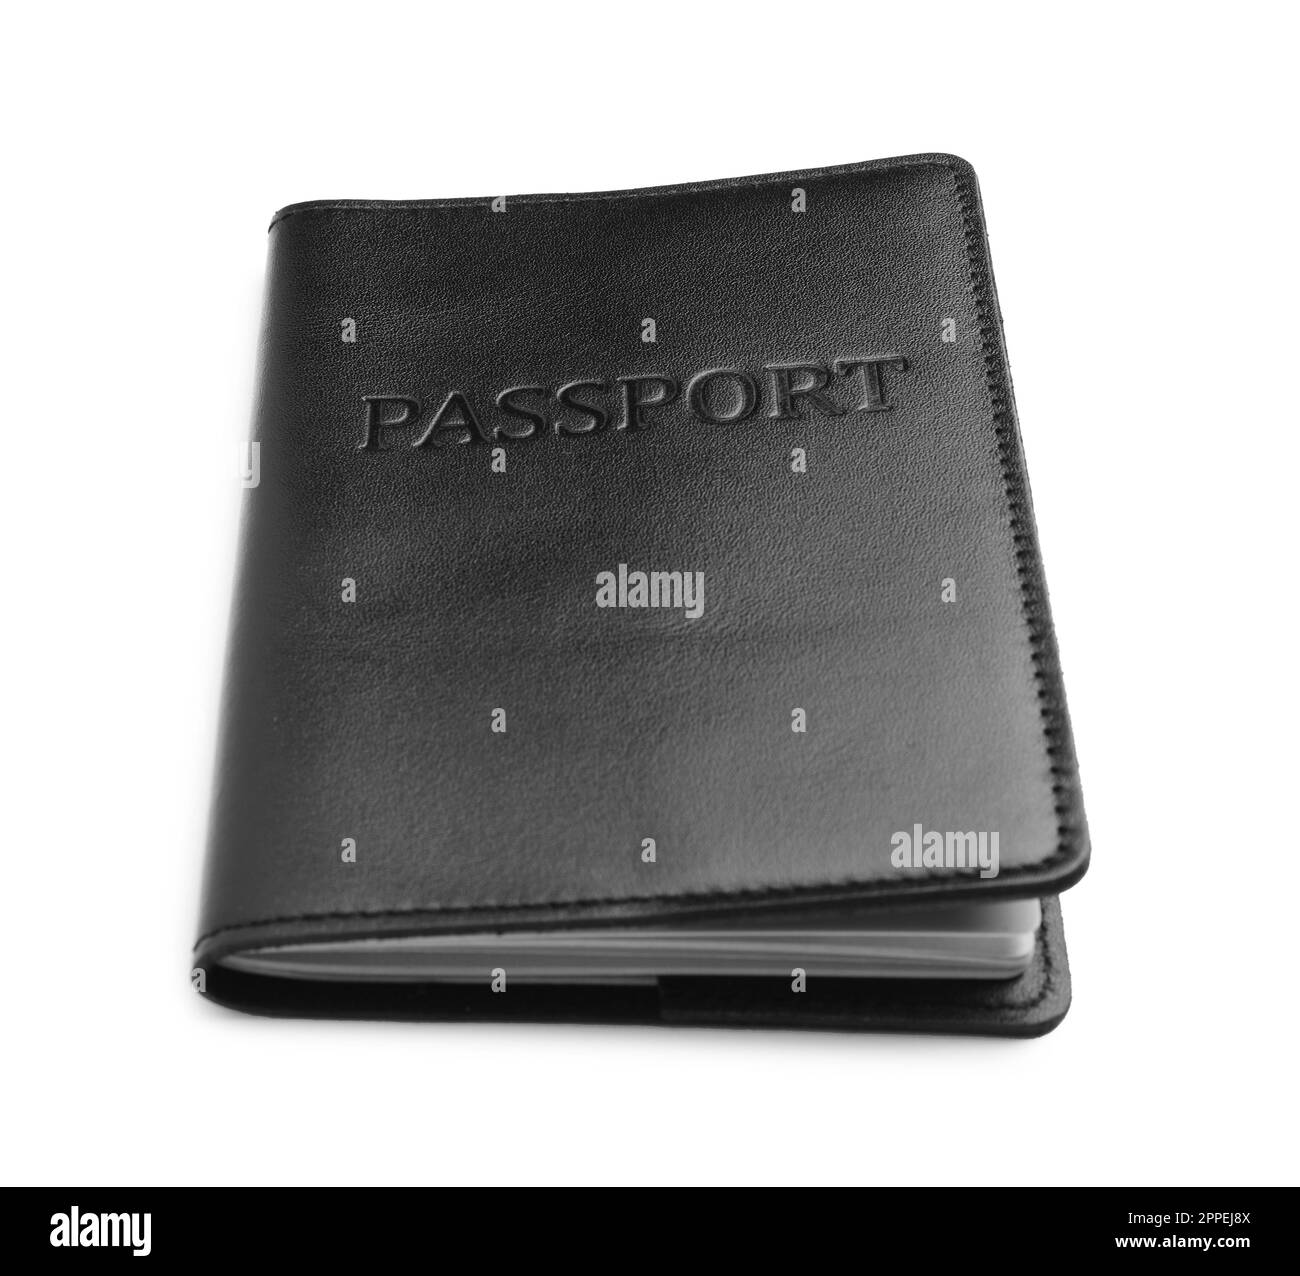 Passport in black leather case isolated on white Stock Photo